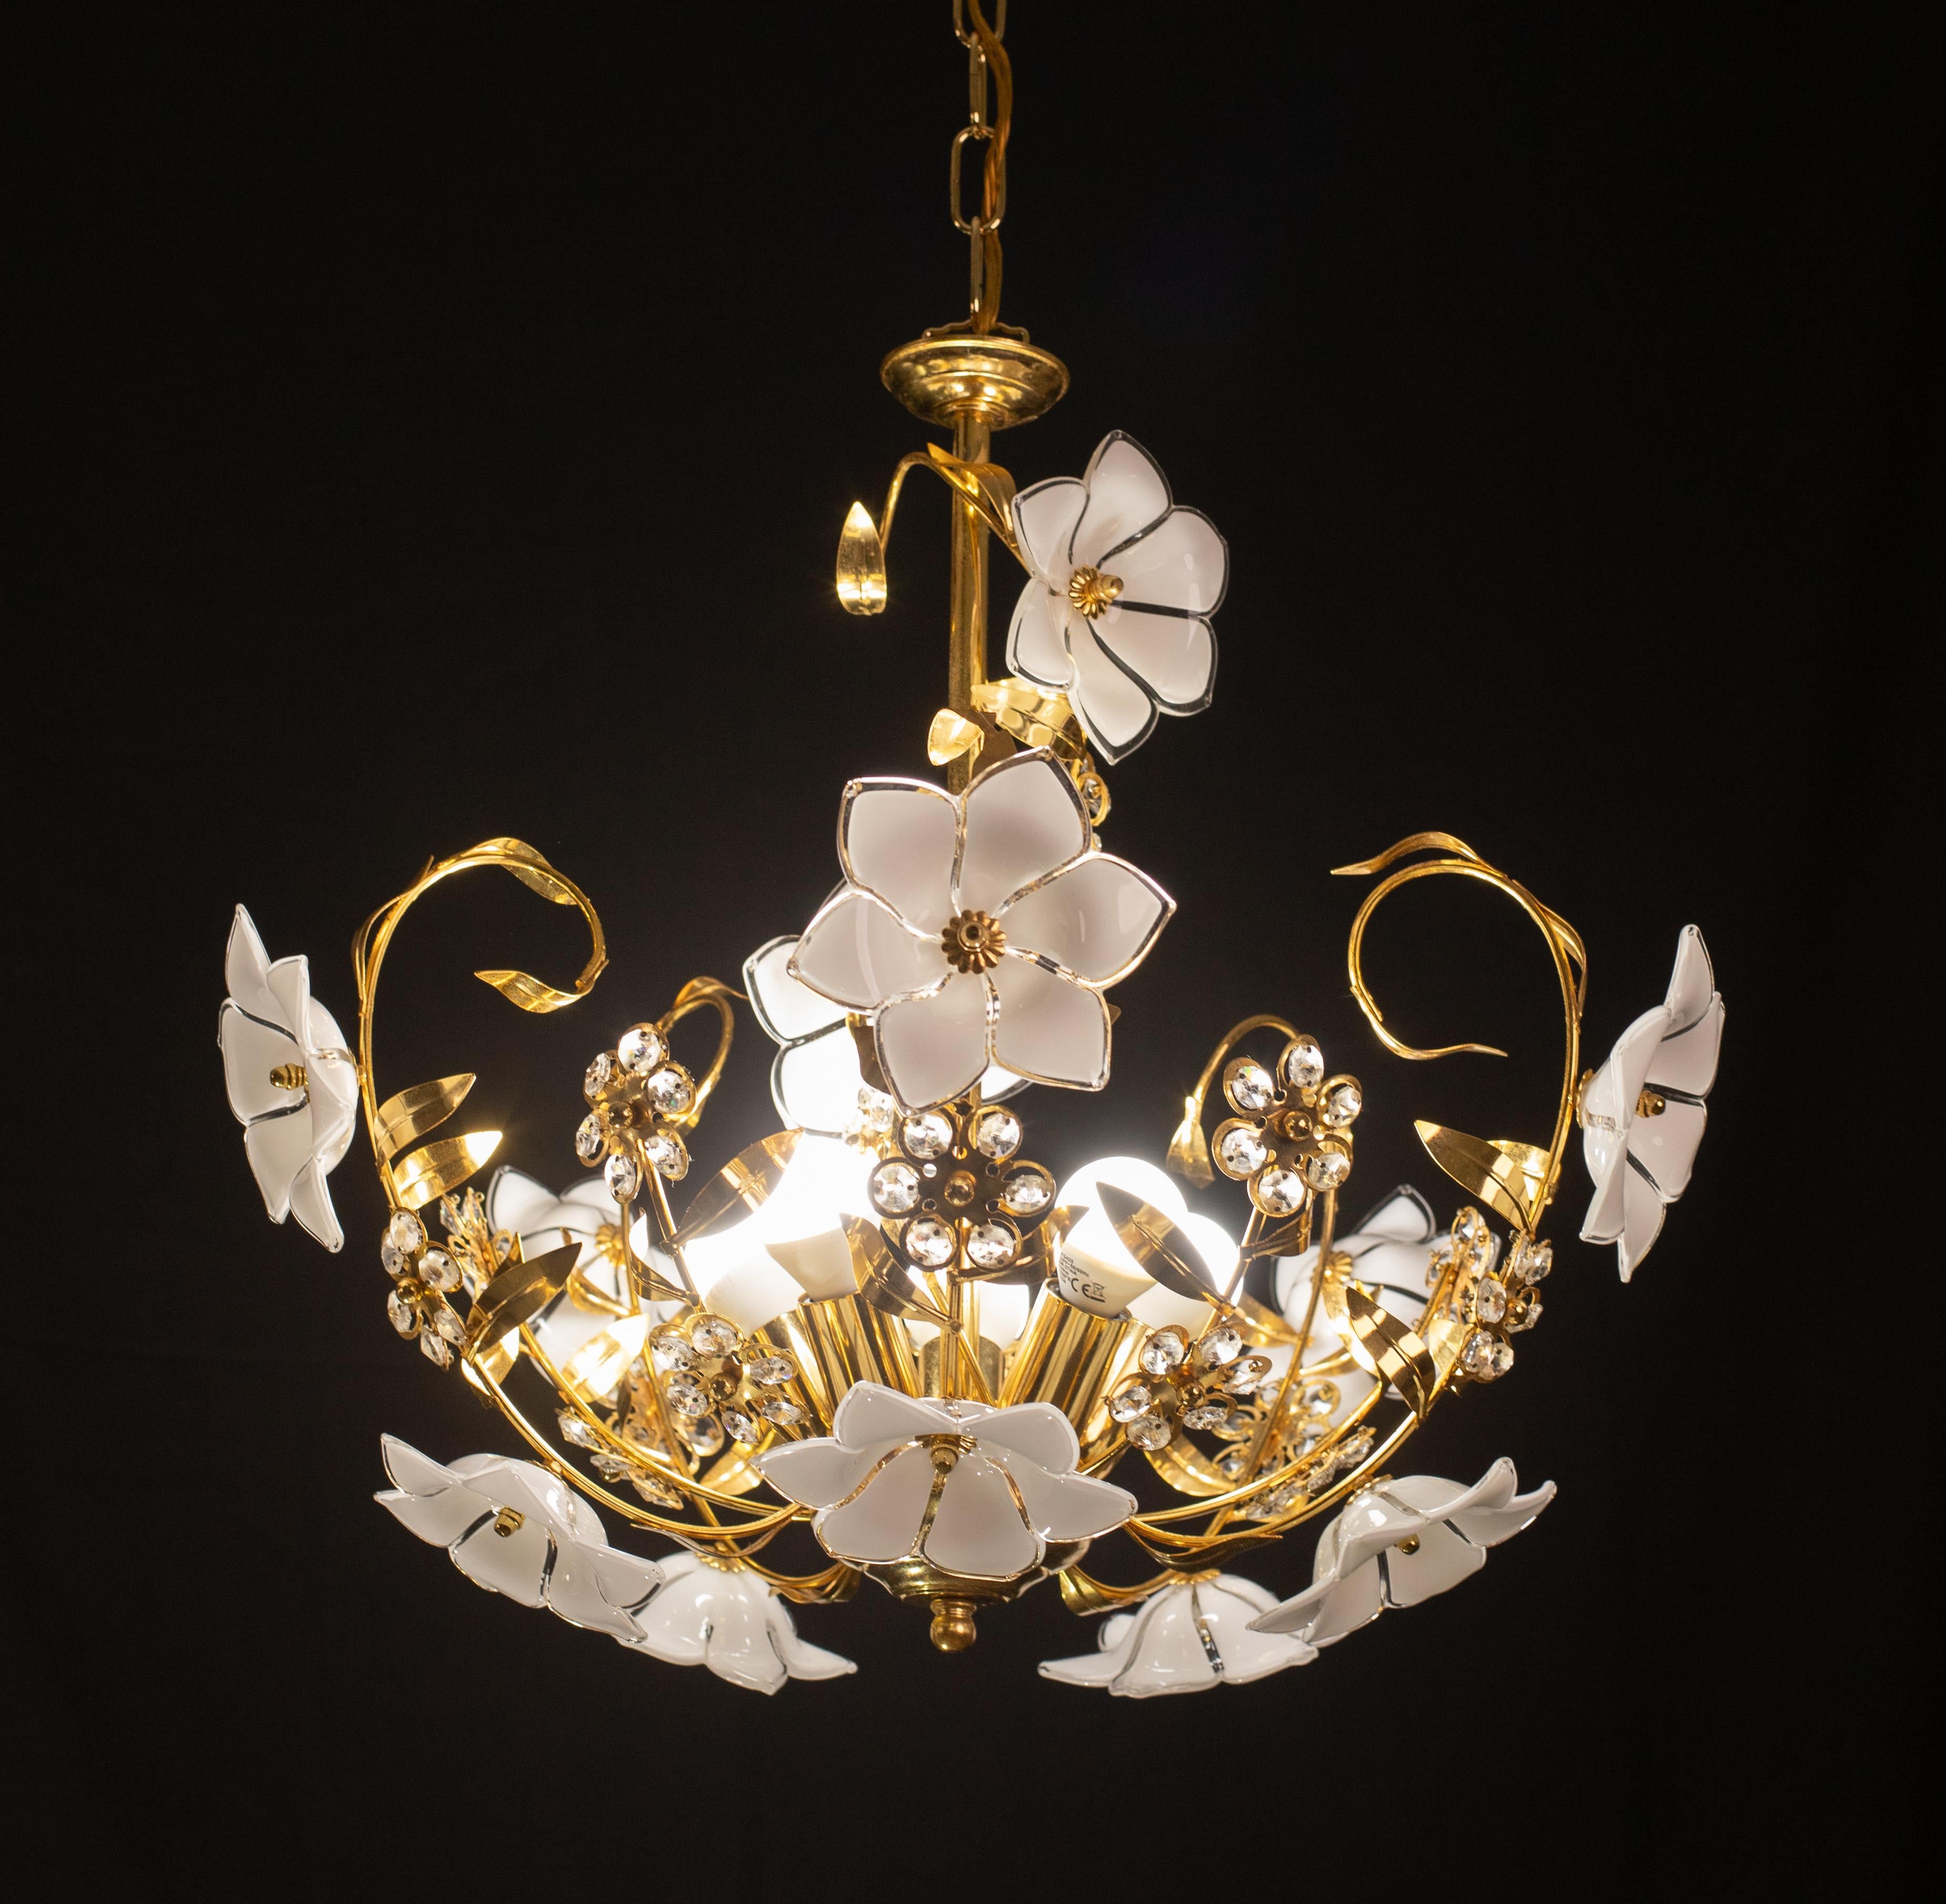 Vintage Murano glass chandelier full of white flowers in murano glass.
The chandelier has 5 light points with E14 socket, possible to rewire for Usa standards.
The frame is made of gold bath in good vintage condition.
The height of the chandelier is